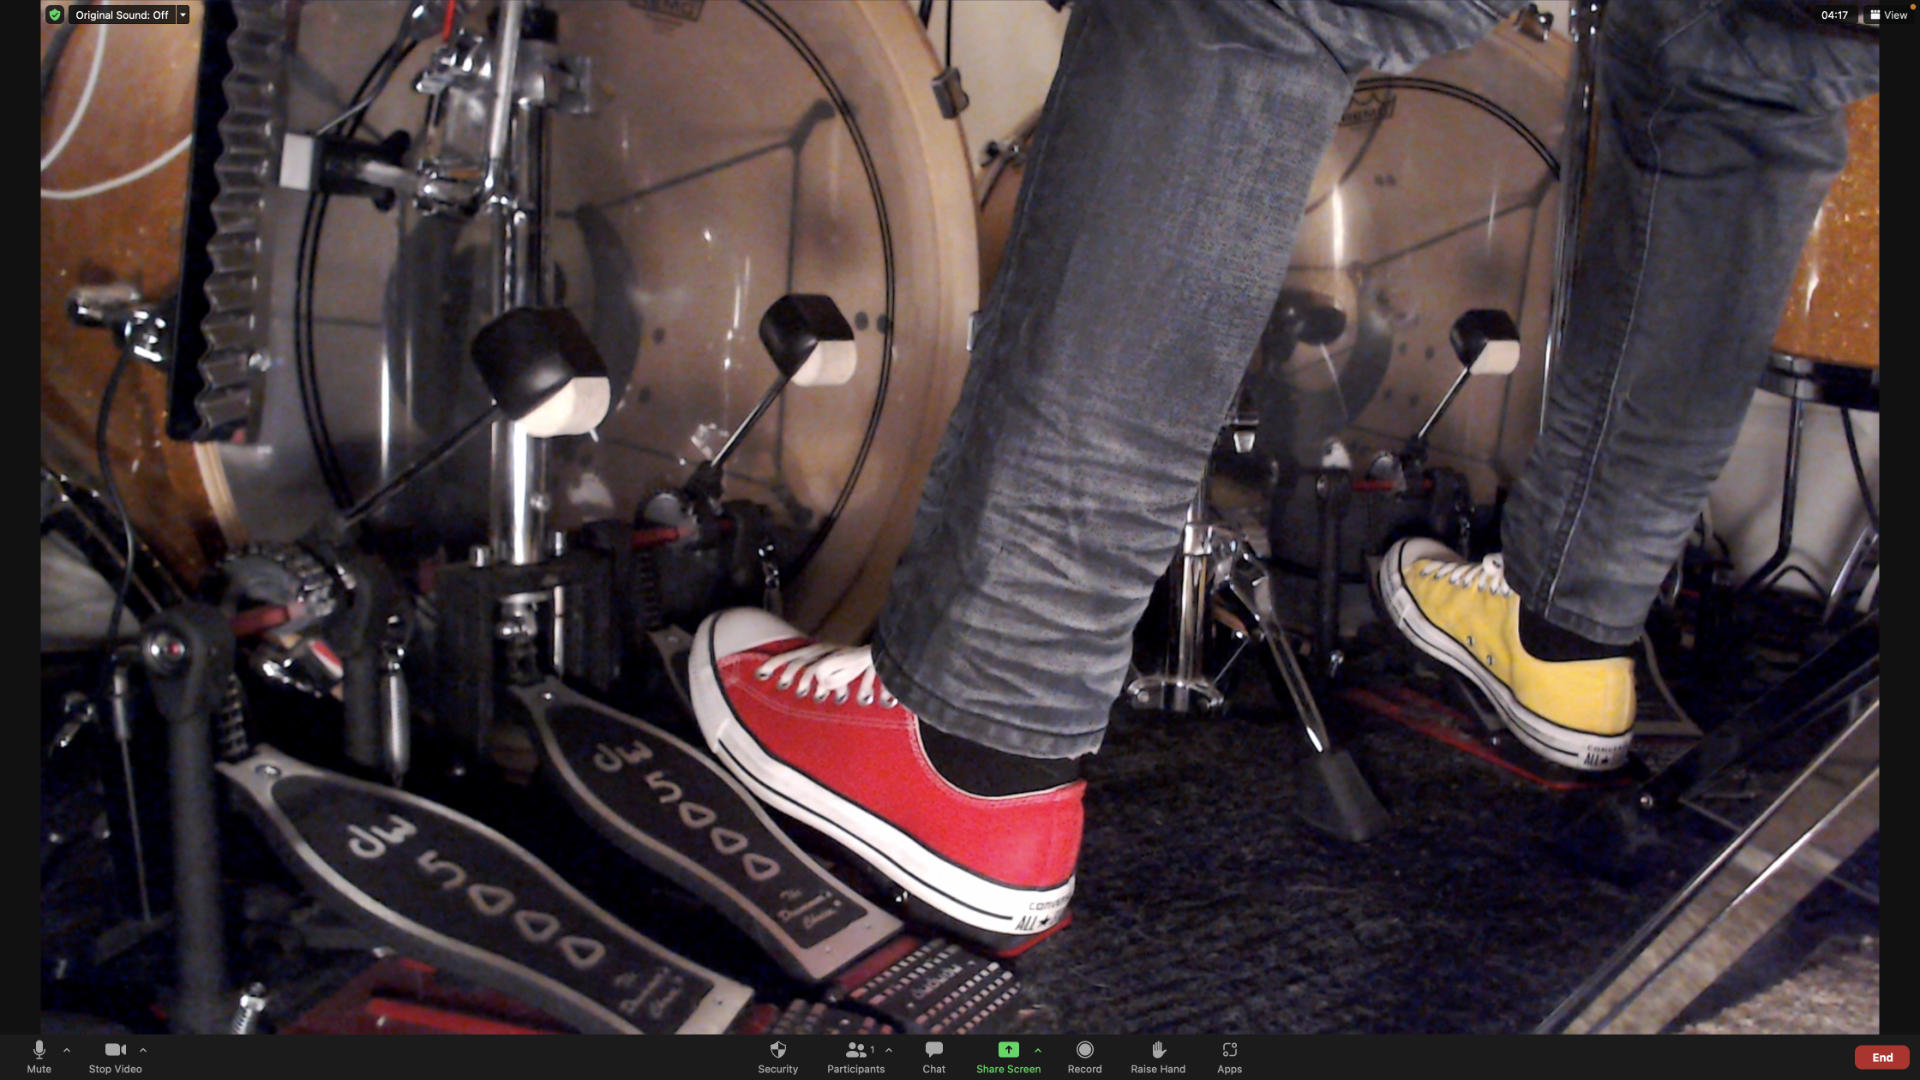 Screen showing Justin's feet playing double bass drums